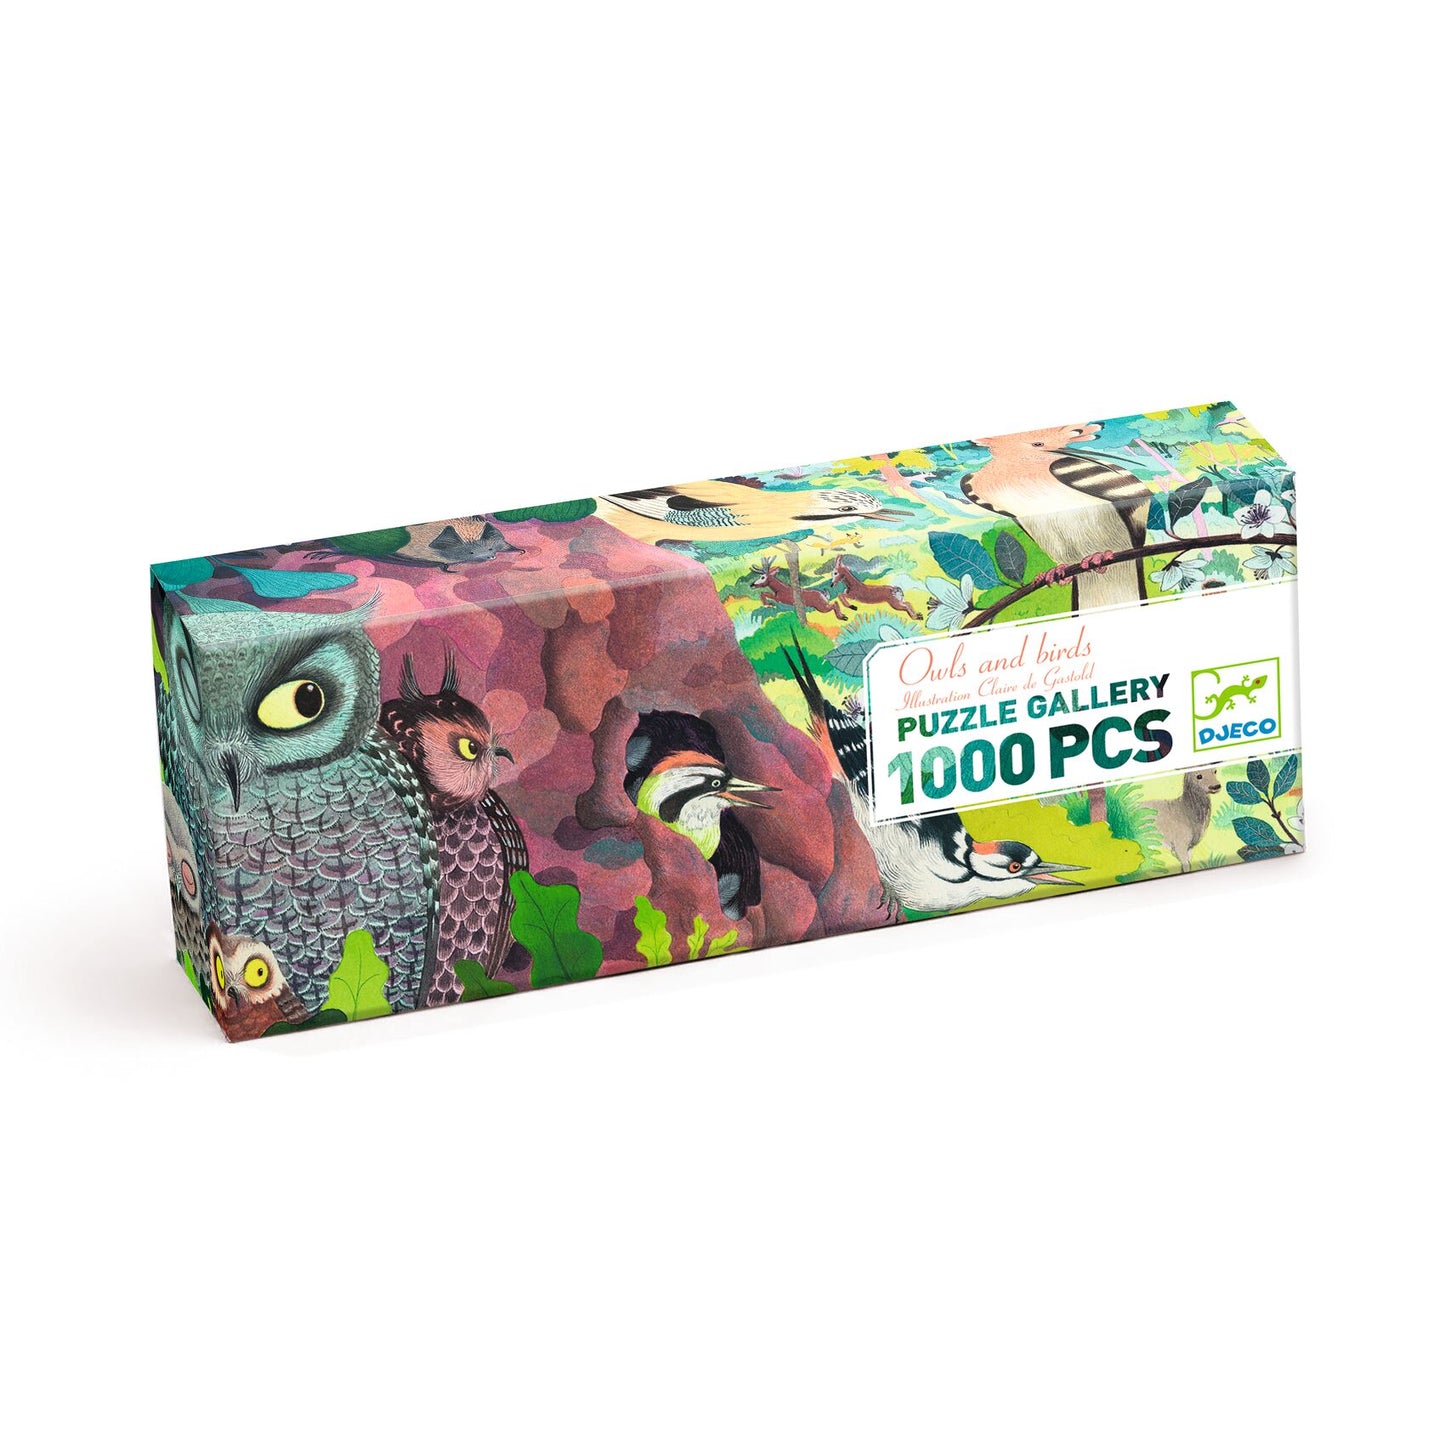 Puzzle Gallery - Owls and Birds 1000pz